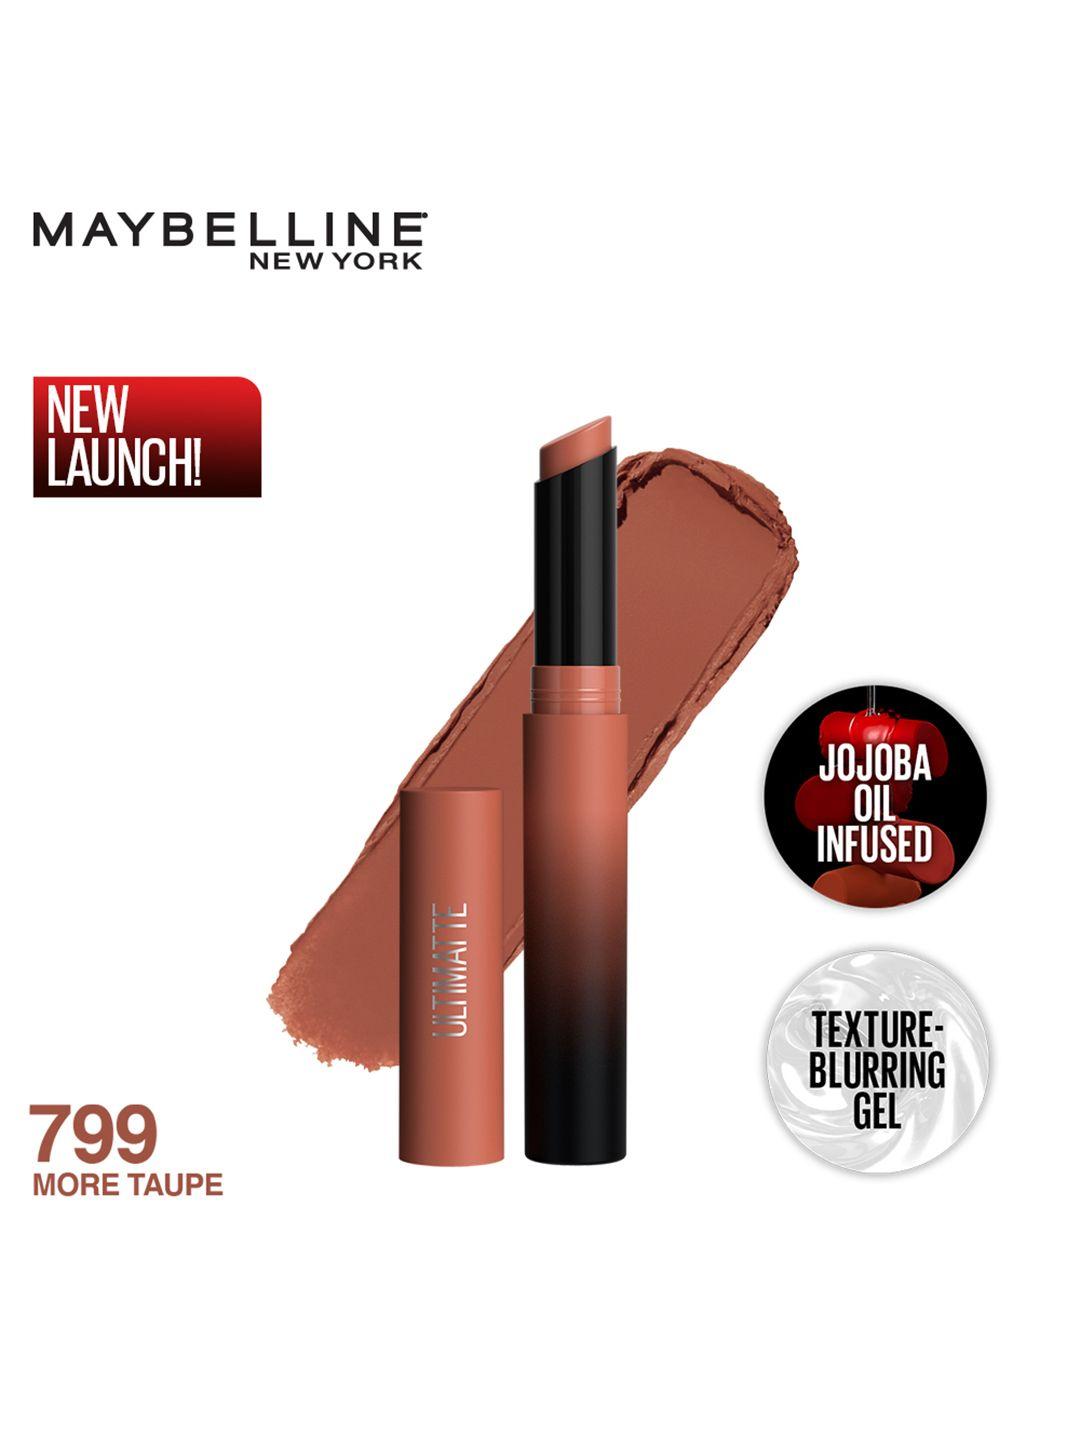 Maybelline New York Color Sensational Ultimattes Lipstick- 799 More Taupe